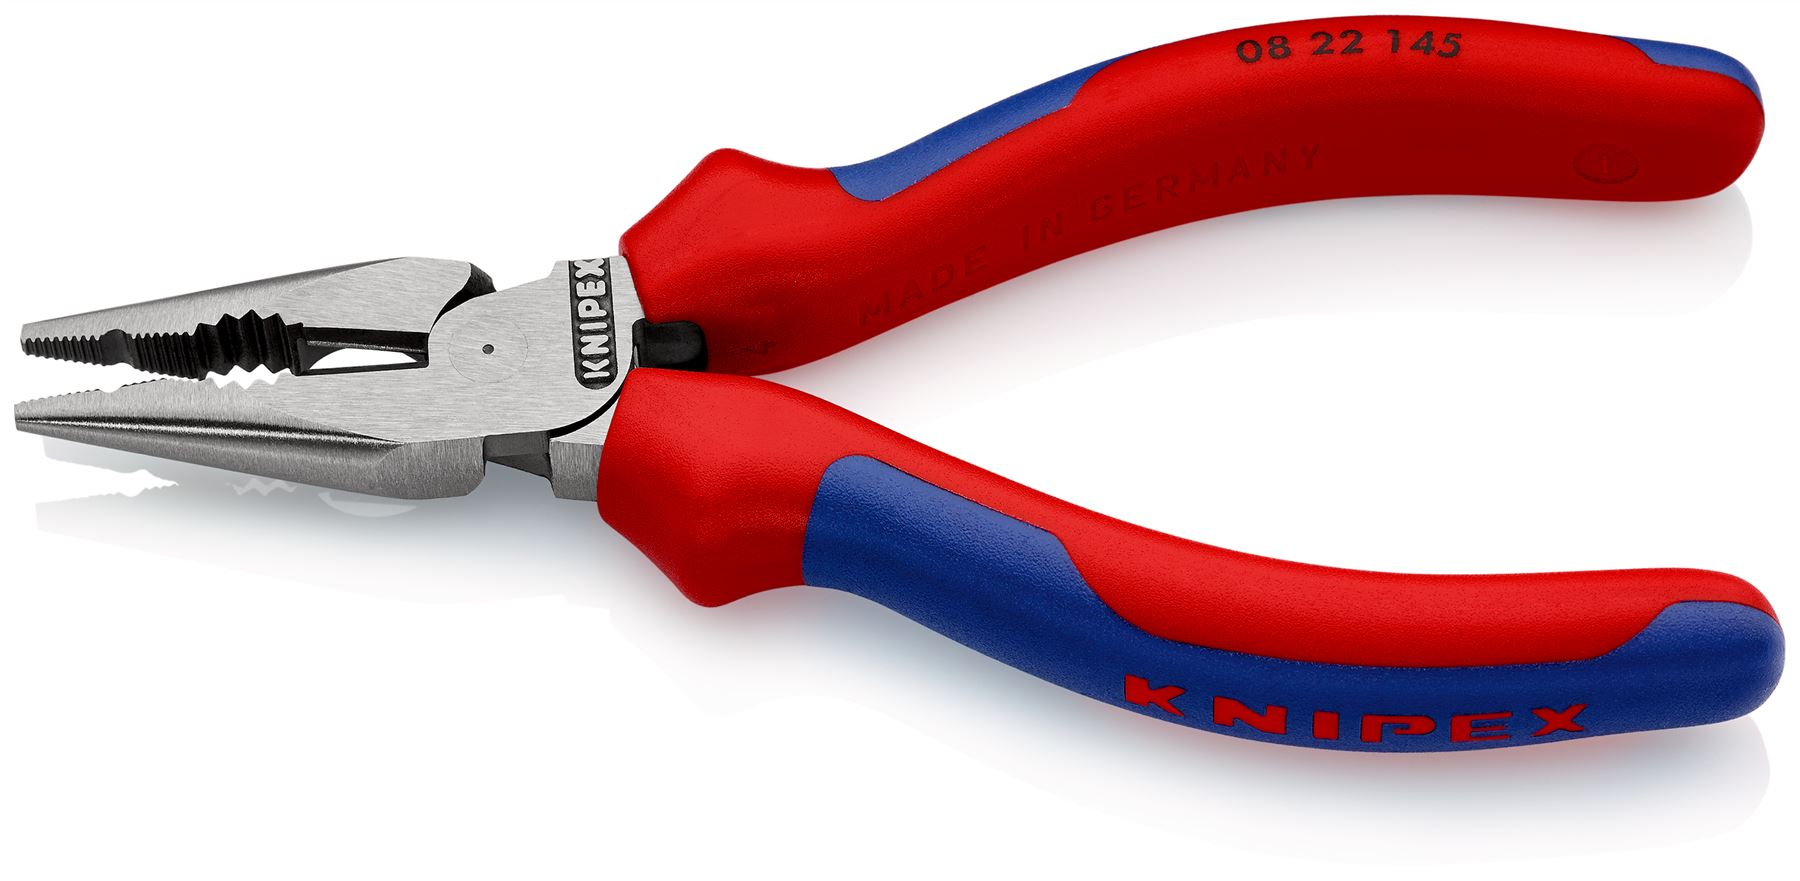 Knipex Needle Nose Combination Pliers 145mm Multi Component Grips 08 22 145